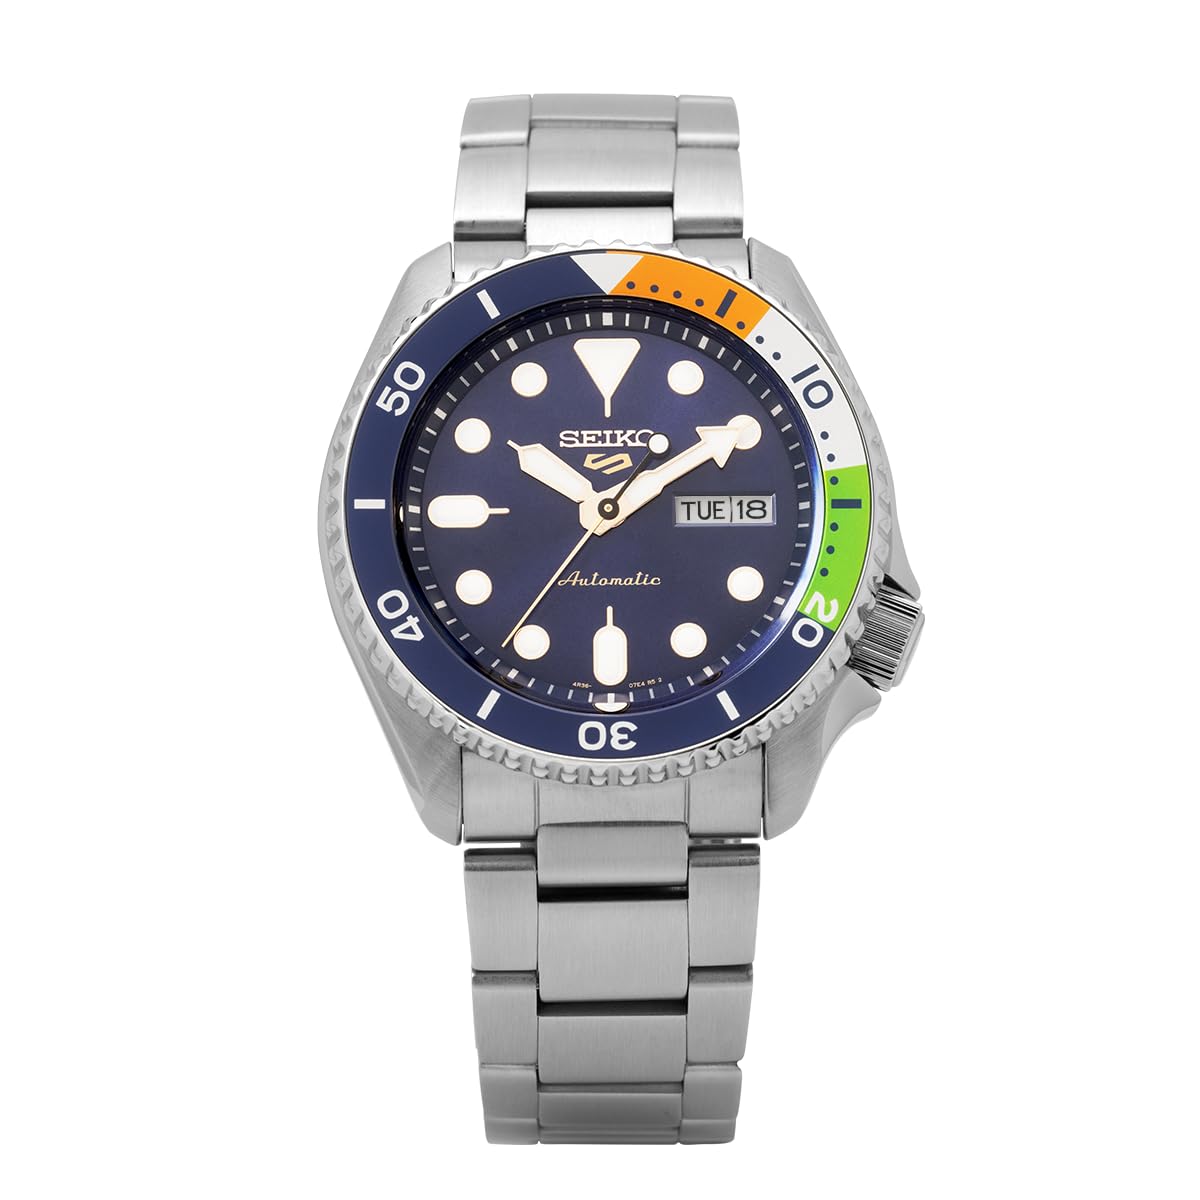 Seiko Limited Edition India Exclusive Blue Dial Men's Watch, Stainless Steel Band, with Extra Silicon Strap